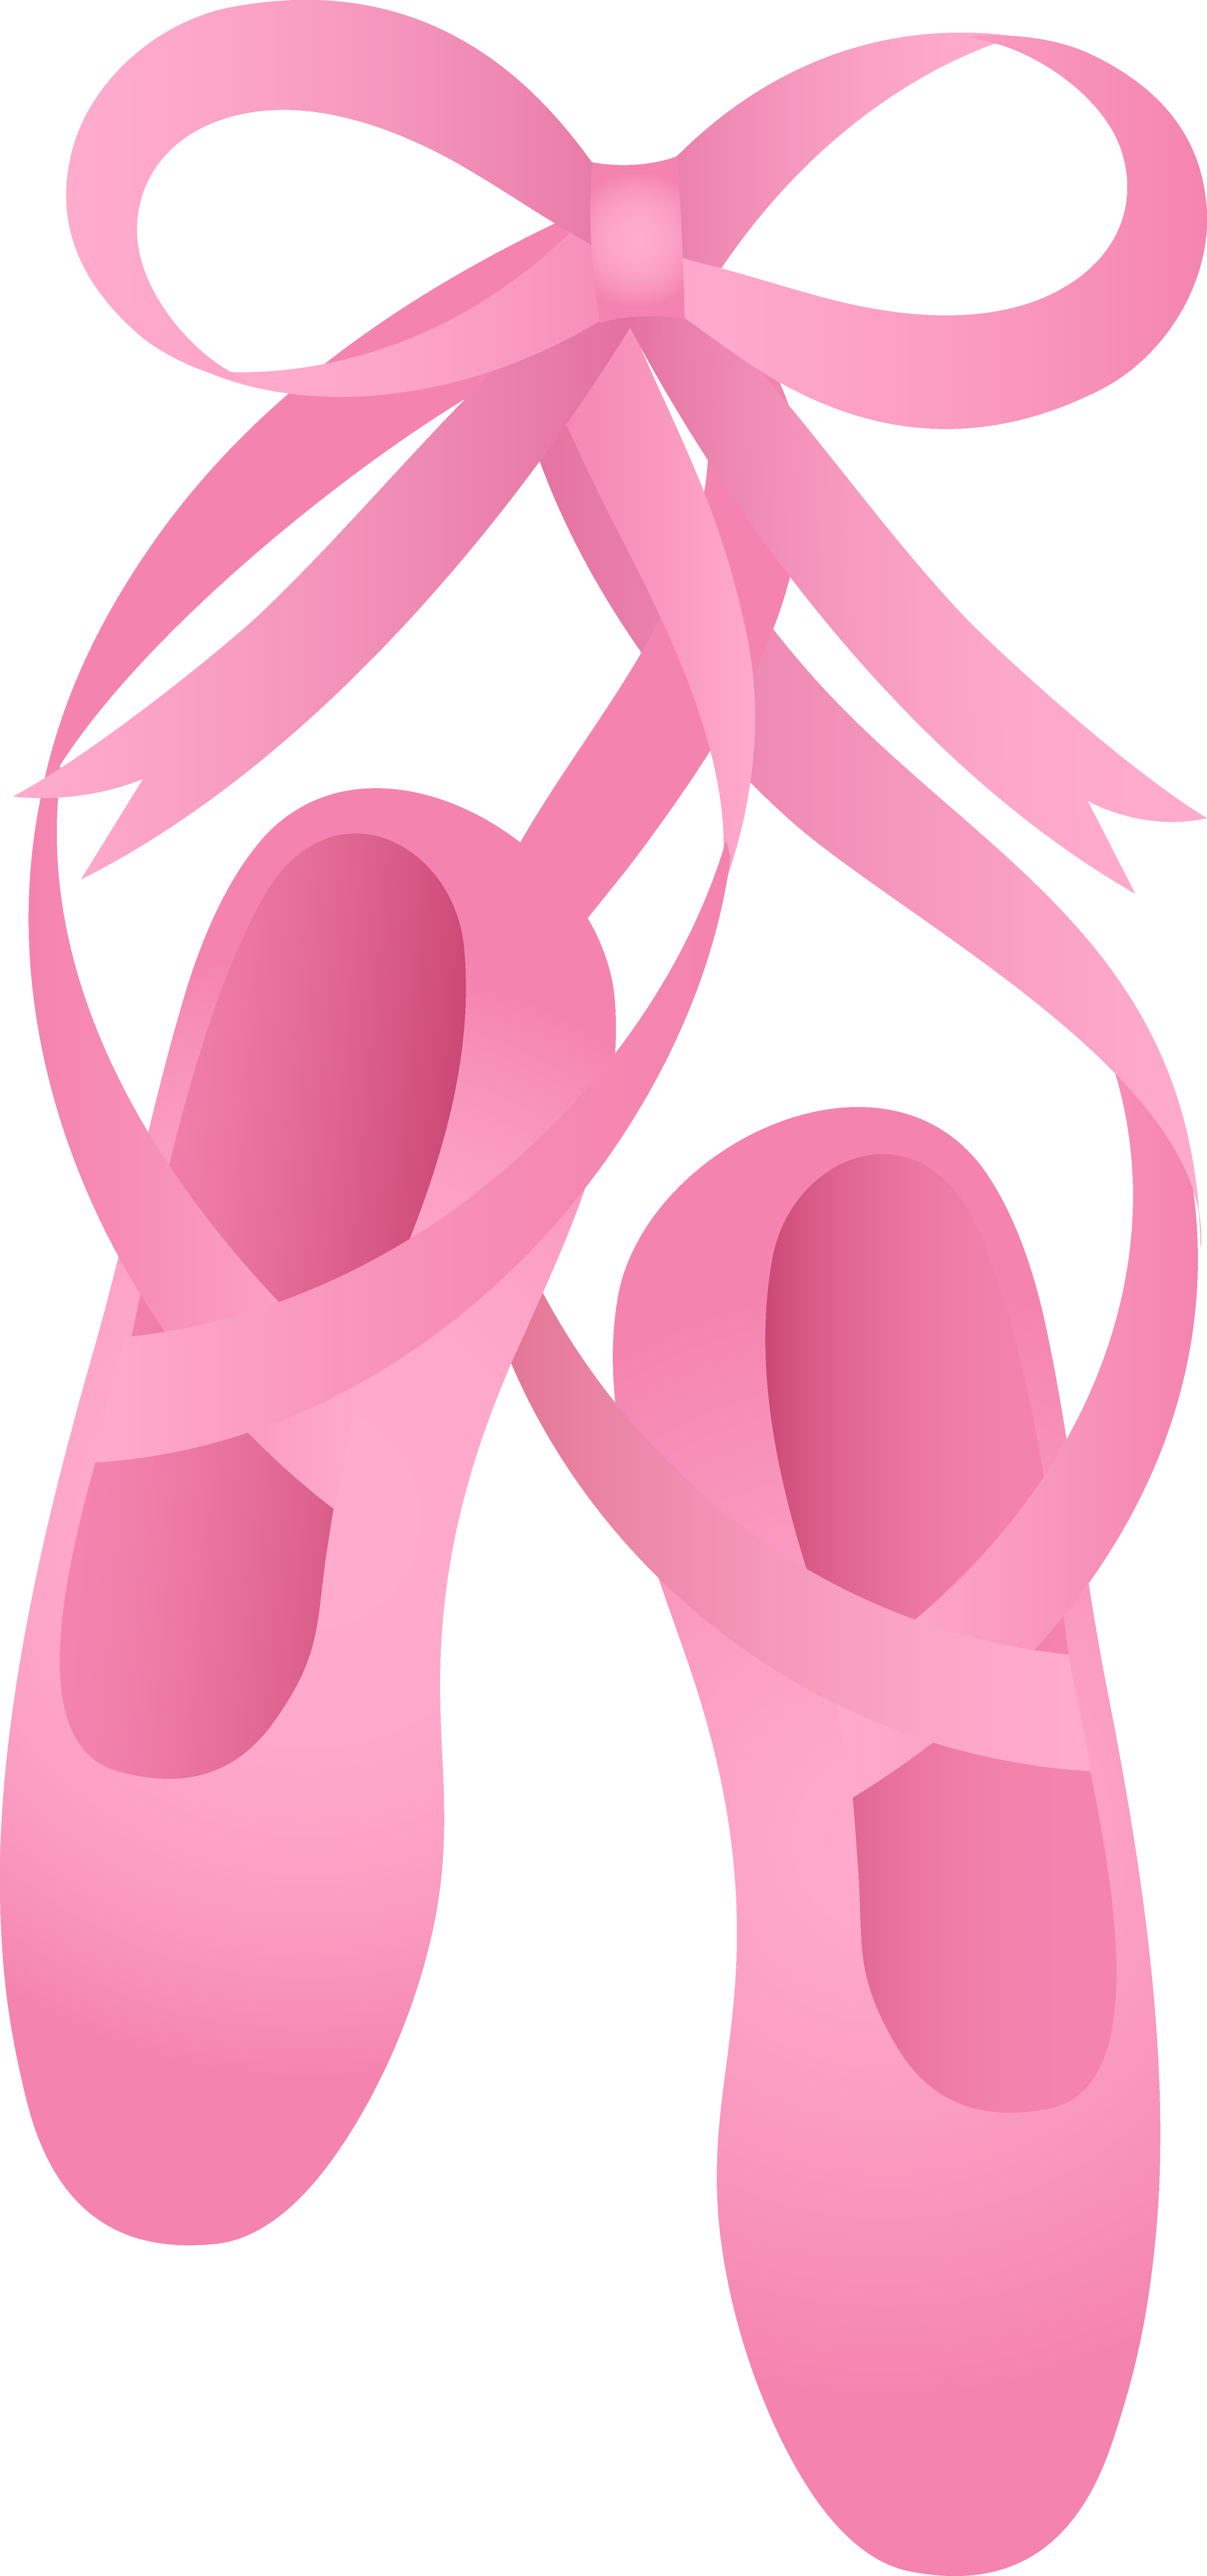 Clipart rose baby. Pink ballet slippers shoes